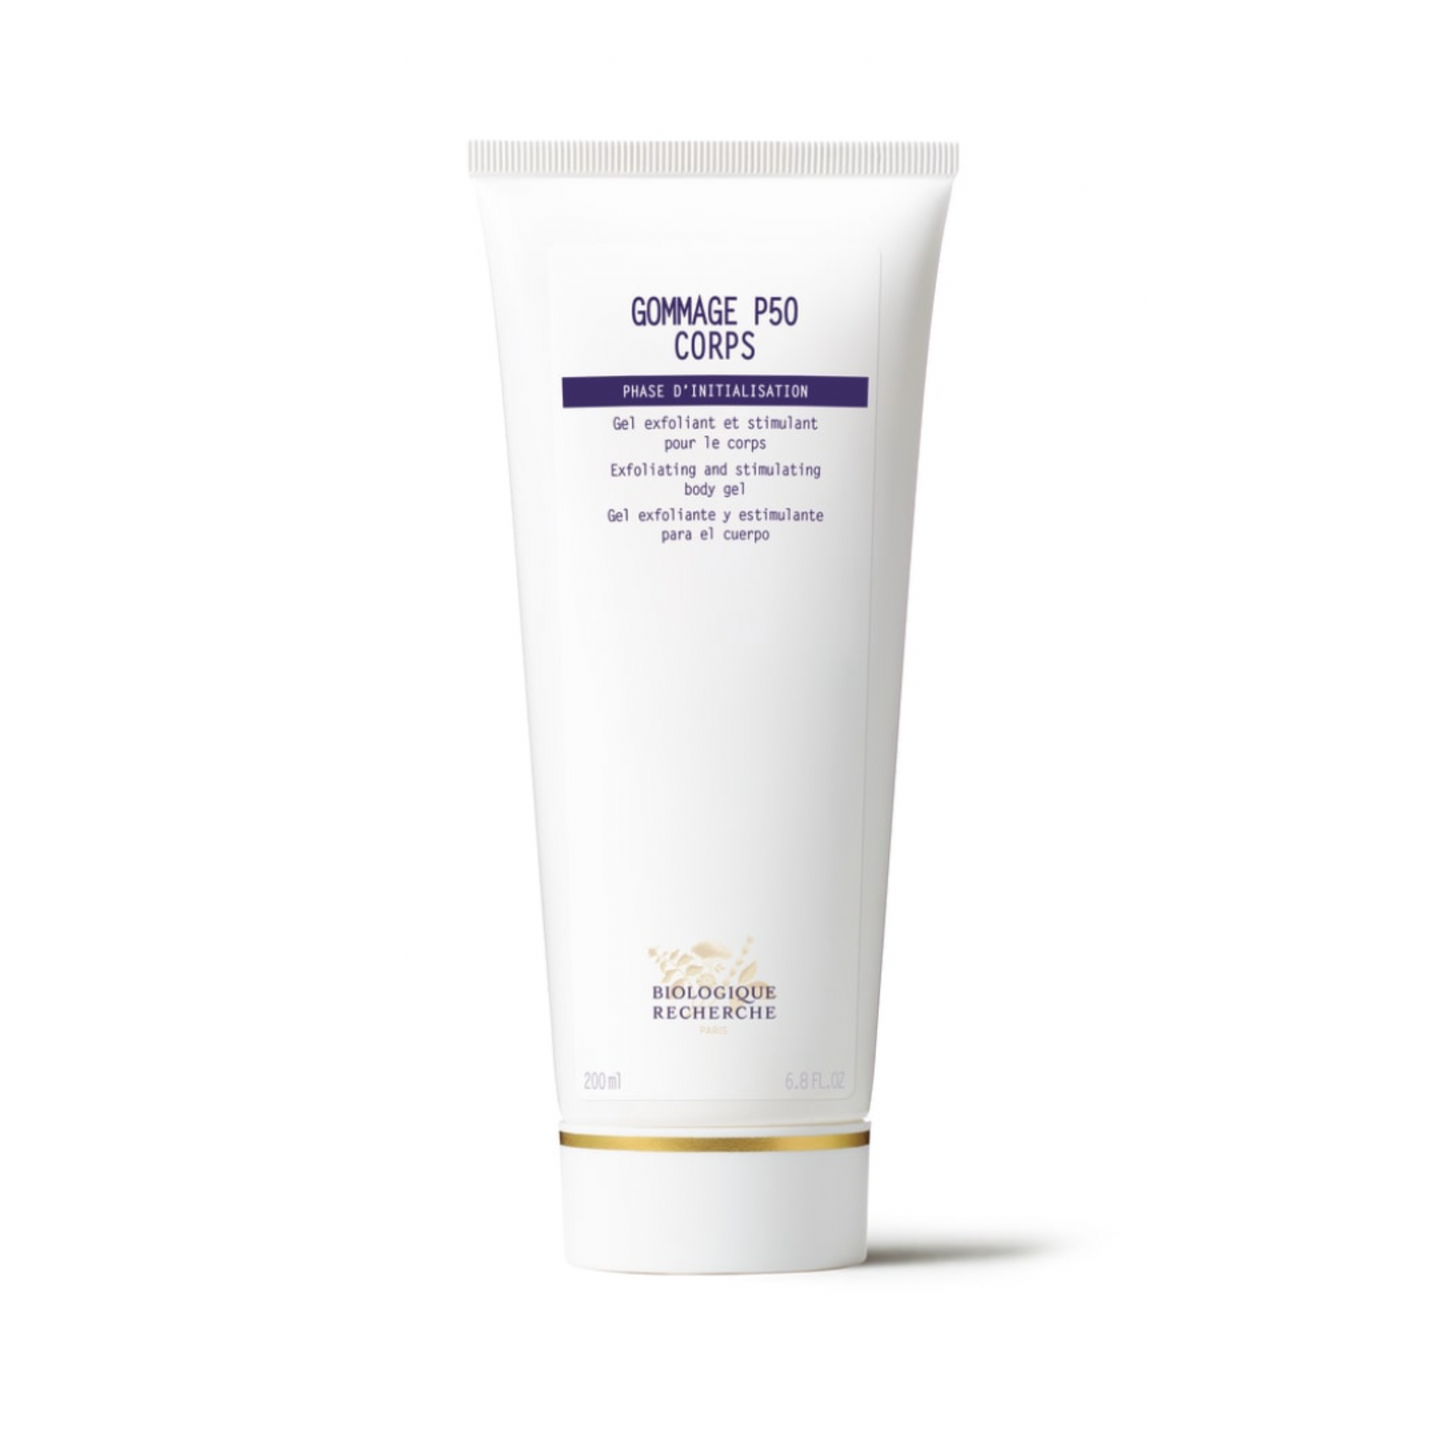 Gommage P50 Corps: Chemical & Mechanical Body Exfoliant